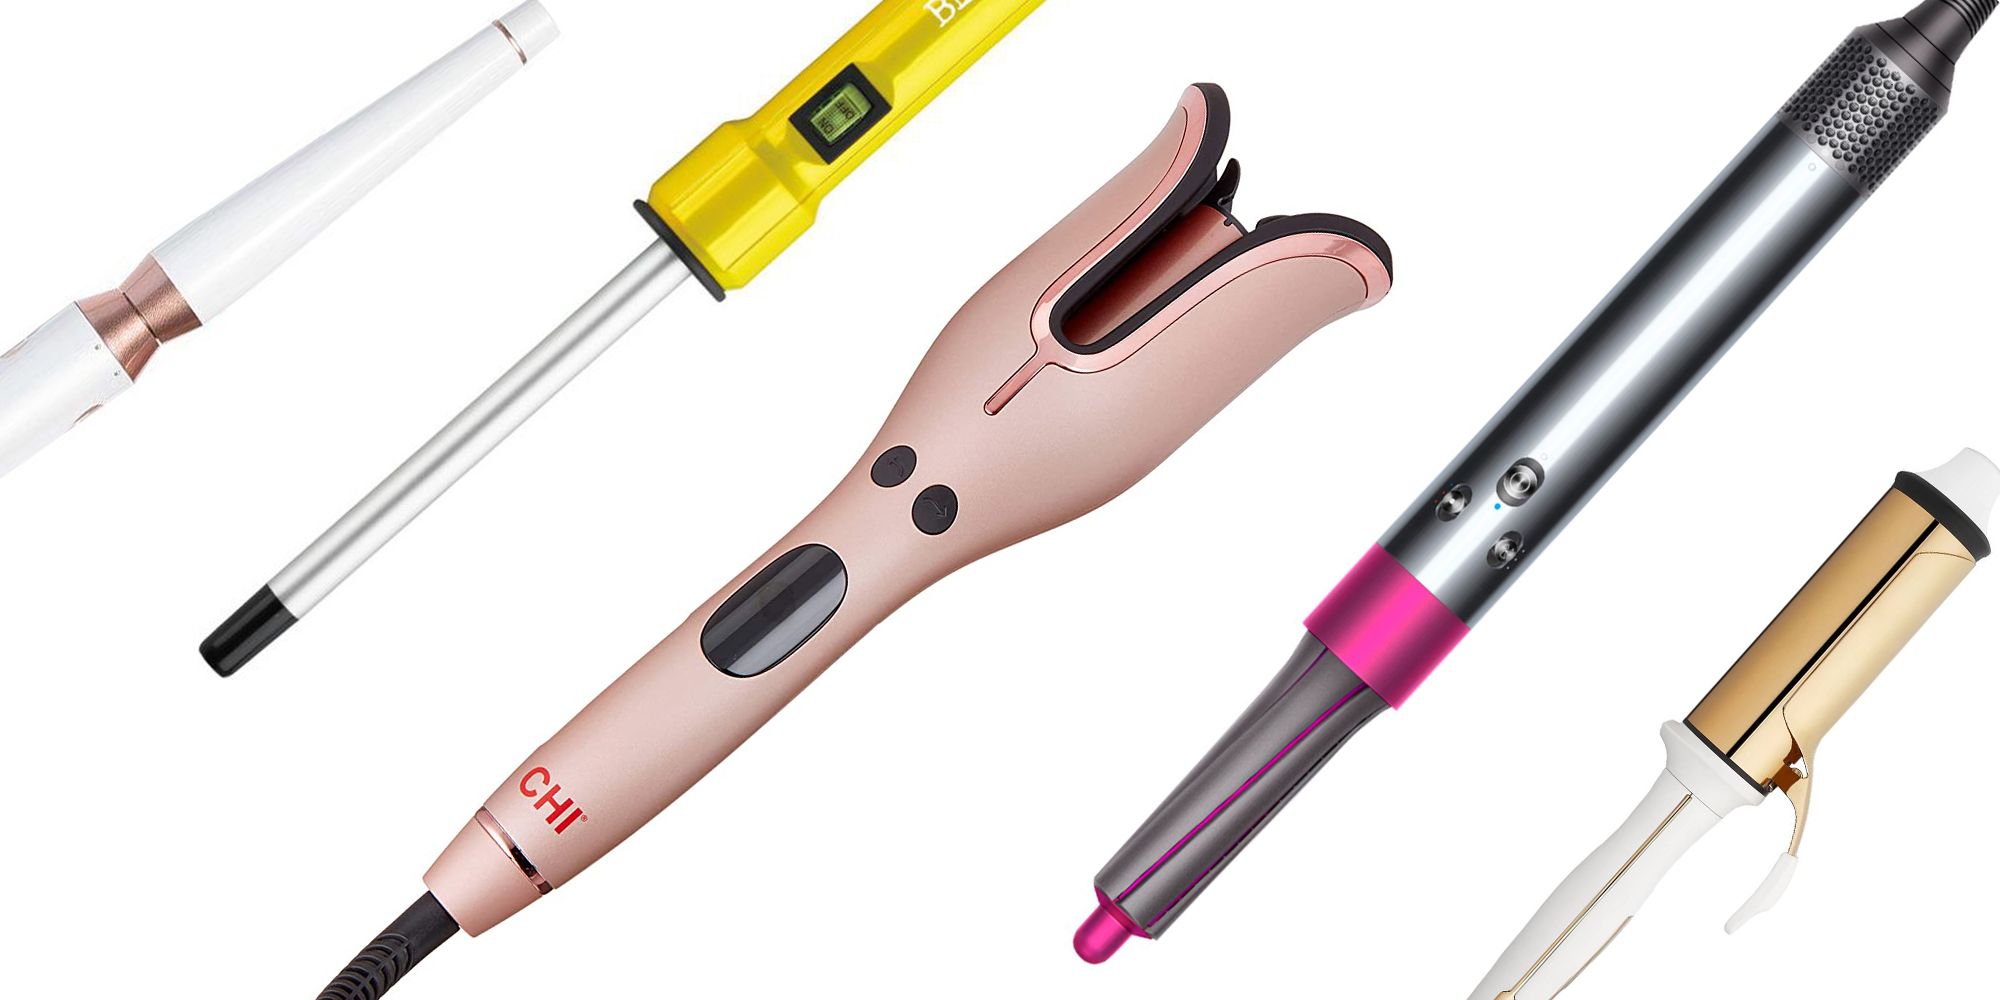 The 9 Best Curling Irons 2022 for Every Hair Length and Type